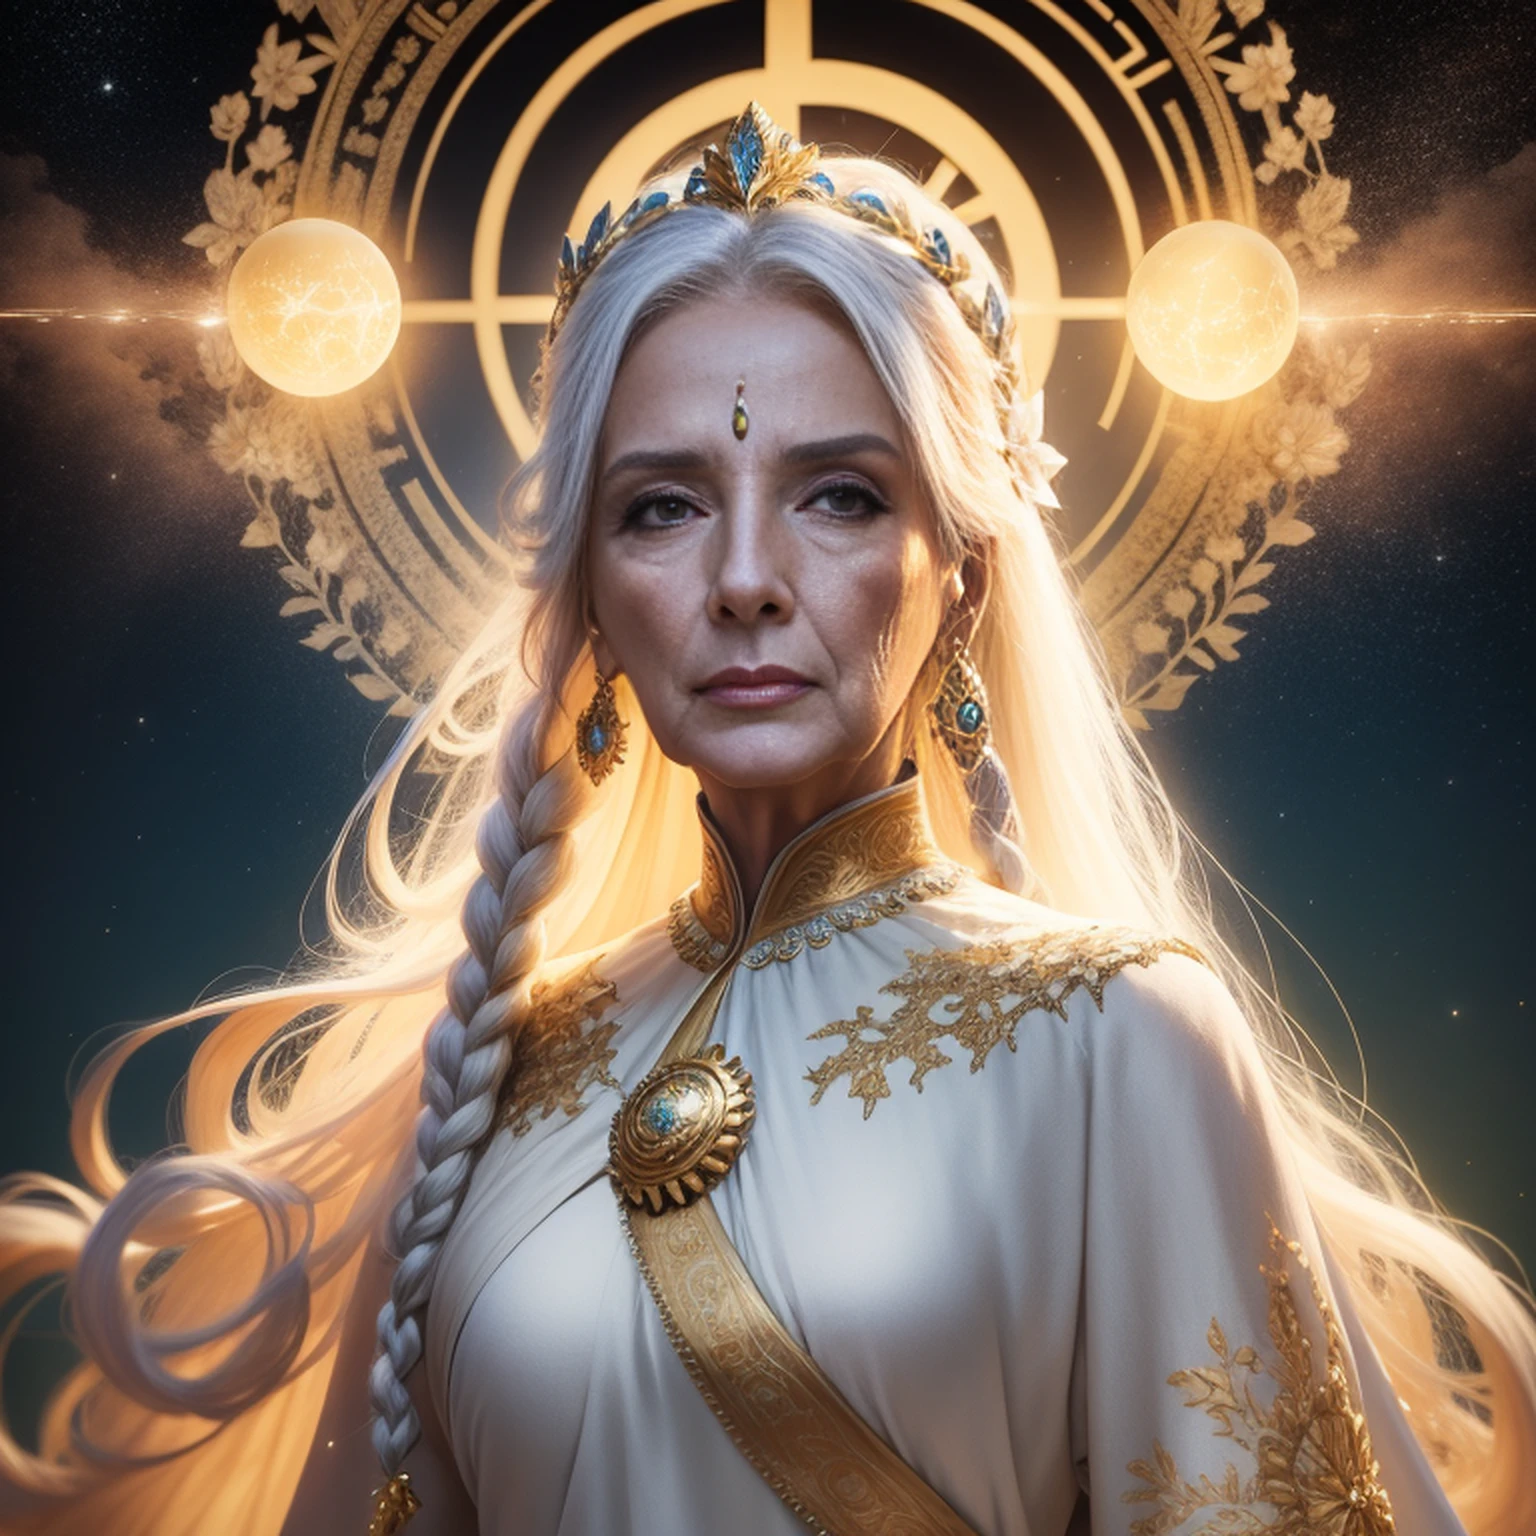 Goddess Hera, White hair, age 65 years, freckles on the face, freckles on breasts, braided hair, detailded, white outfit, roupa chiton, long robes, golden crown, Detalhes em dourado, white flowers, glorious poses, natta, moonligh, stele, olympus background, luminosity, Ablaze, ultra-realistic, ray tracing